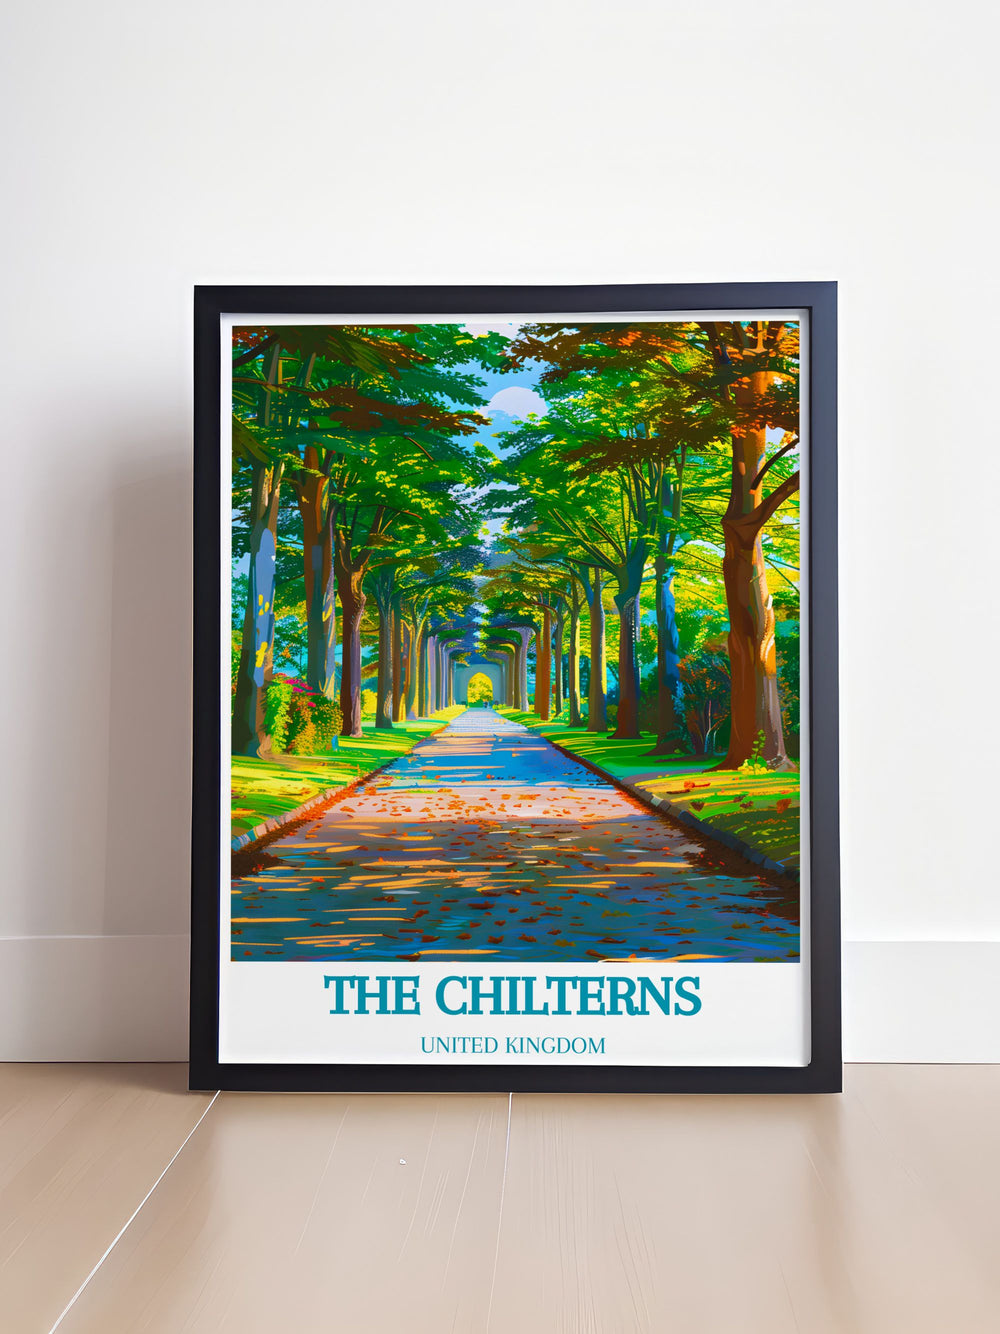 The Chilterns Wall Art featuring iconic views such as Ivinghoe Beacon and Dunstable Downs, bringing the diverse landscapes and historic sites of this picturesque region into your home with detailed prints.